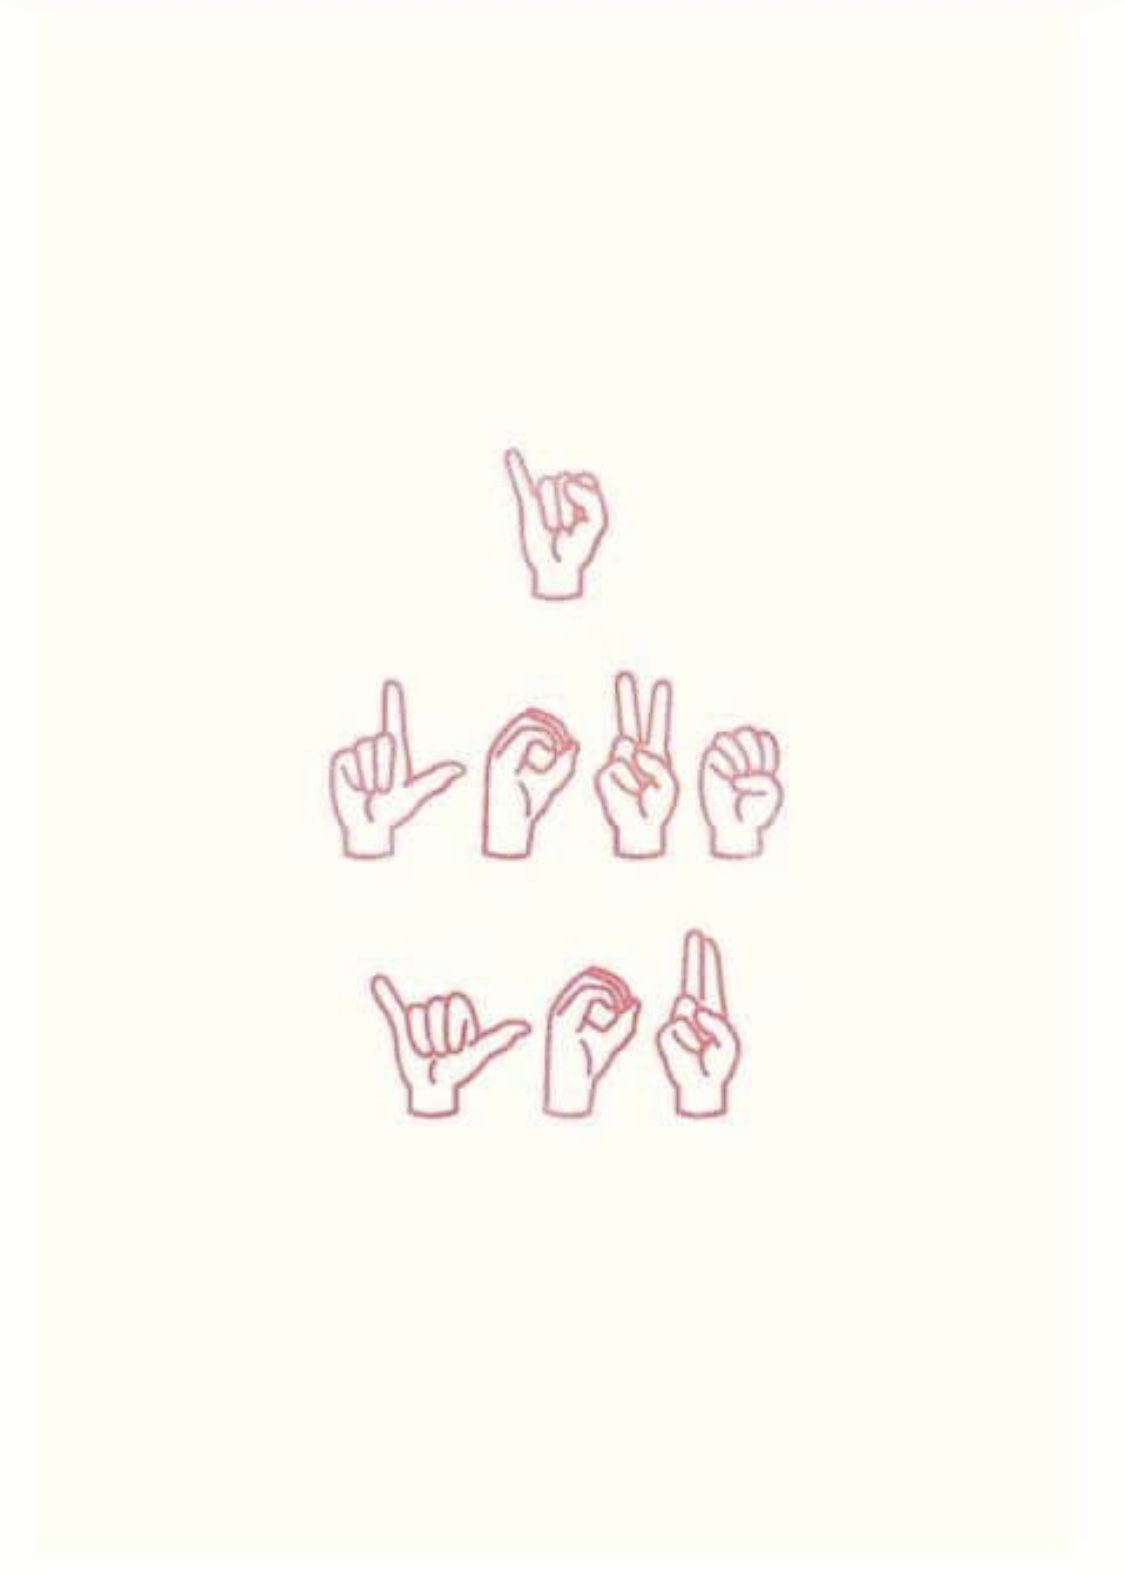 I love you” in American Sign Language. Sign language phrases, Sign language words, Sign language